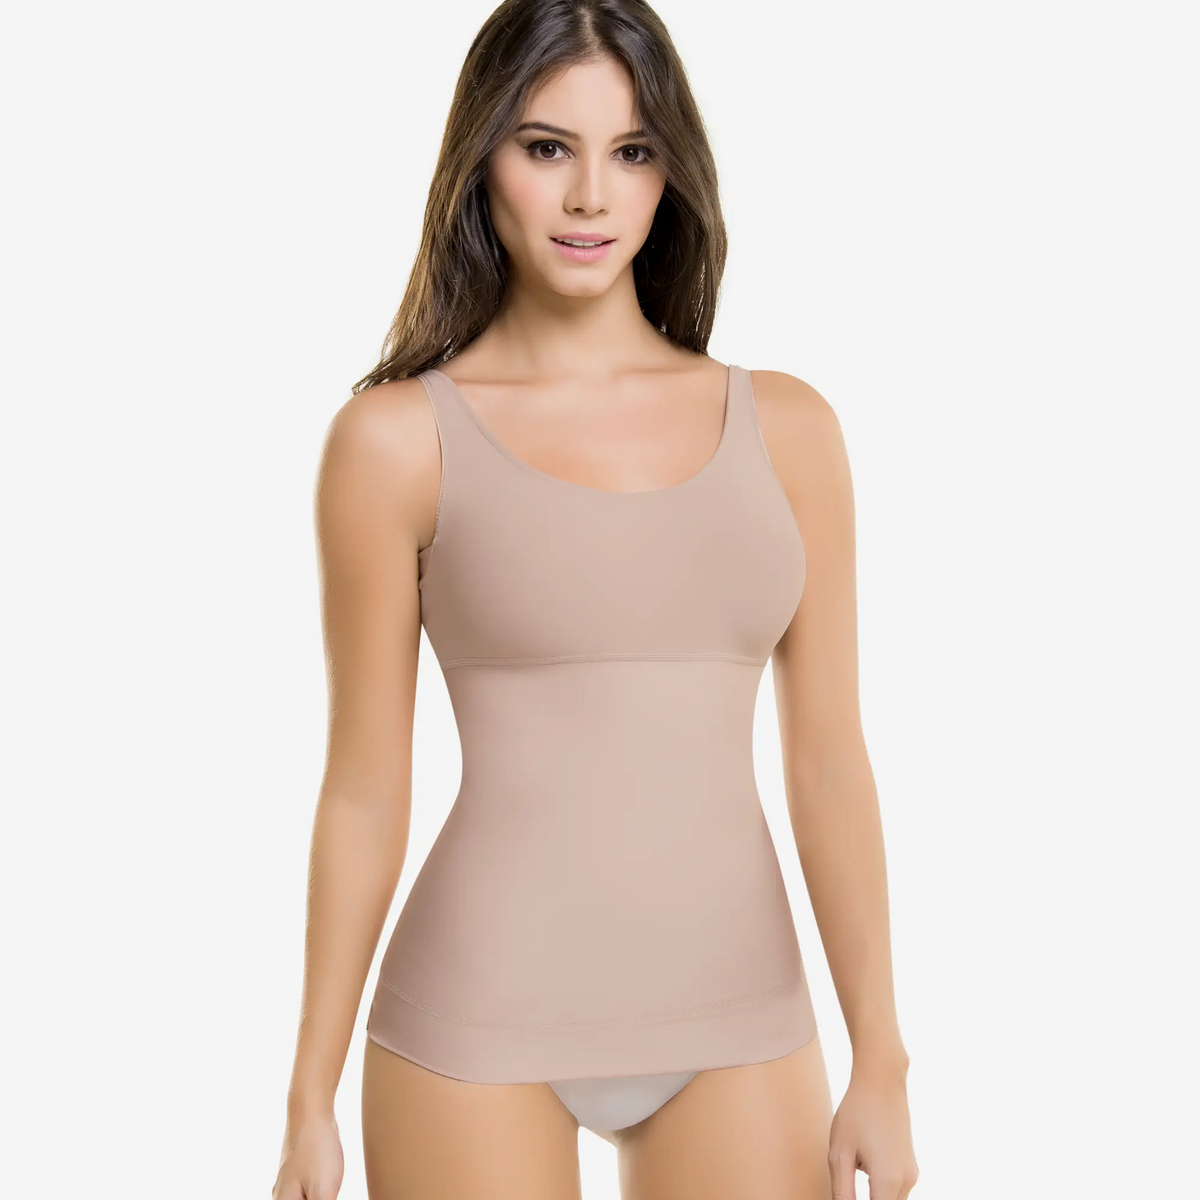 Feel sexy with our ultra silhouette shapewear line by CYSM — CYSM Shapers